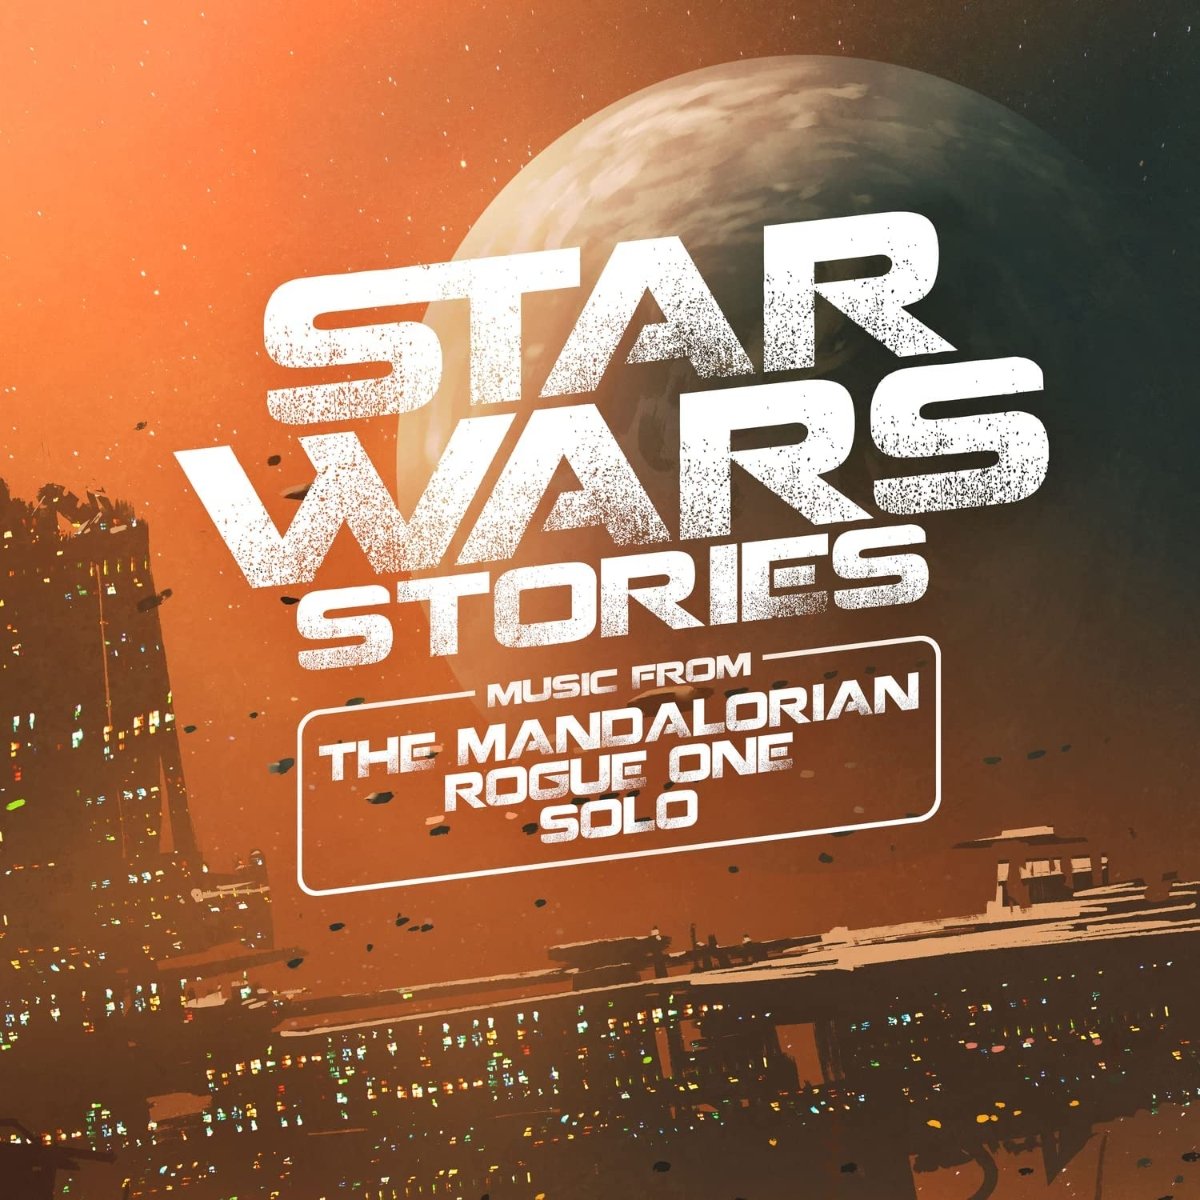 CD Shop - VRABEC, ONDREJ Star Wars Stories - Music from The Mandalorian, Rogue One and Solo